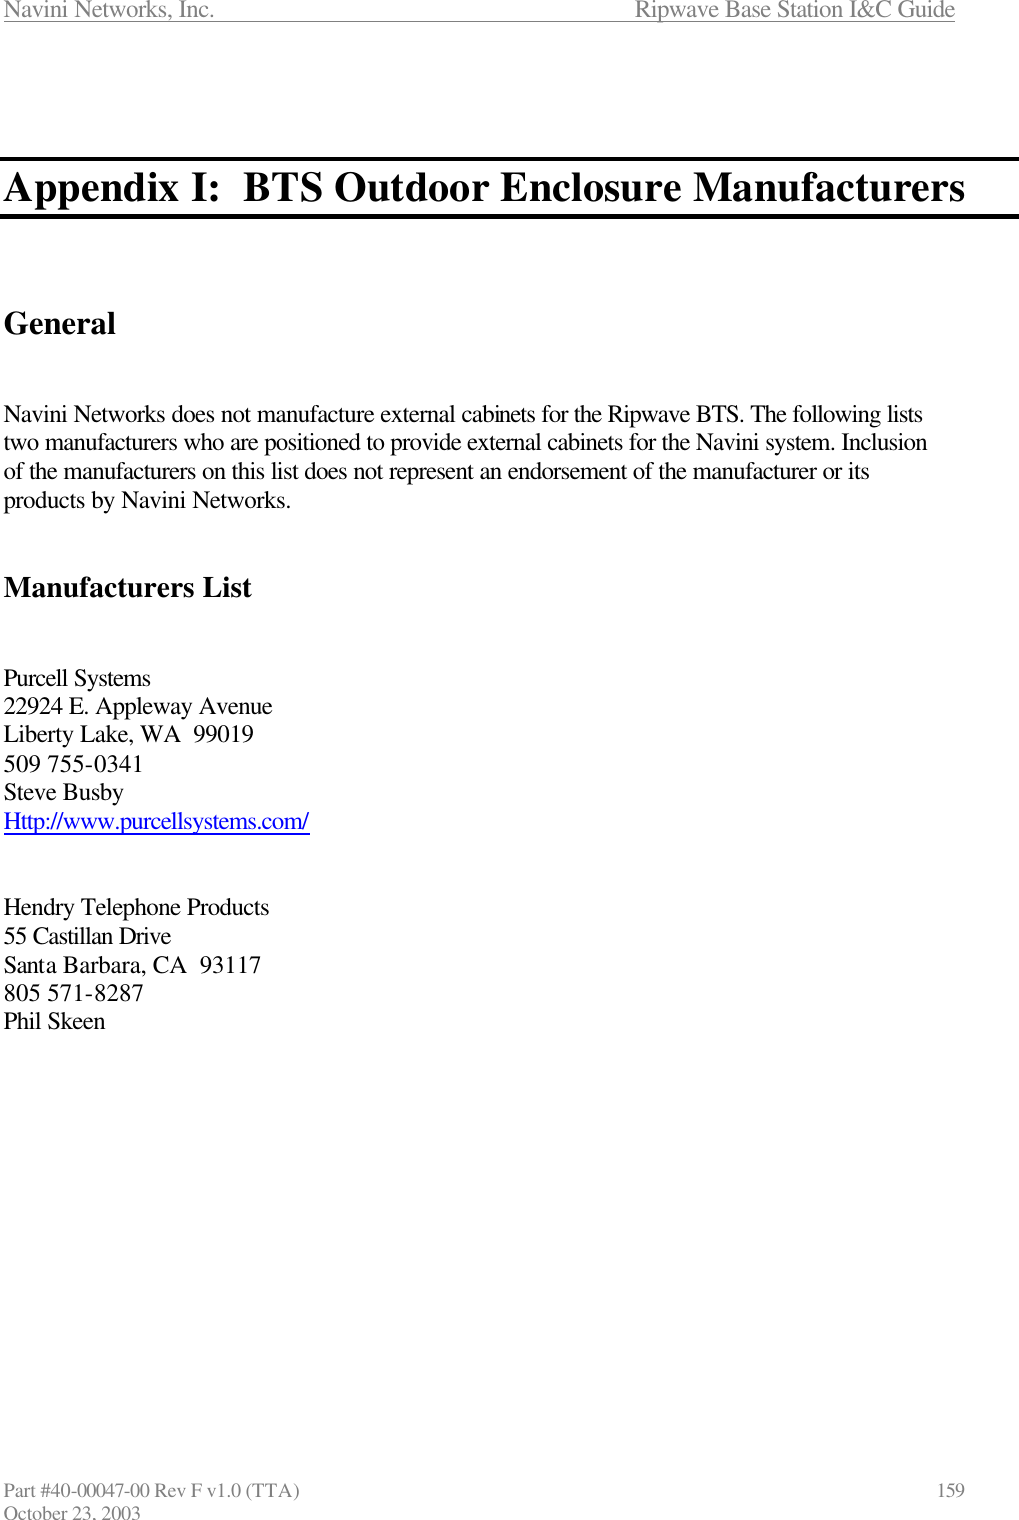 Navini Networks, Inc.                      Ripwave Base Station I&amp;C Guide Part #40-00047-00 Rev F v1.0 (TTA)                            159 October 23, 2003    Appendix I:  BTS Outdoor Enclosure Manufacturers    General   Navini Networks does not manufacture external cabinets for the Ripwave BTS. The following lists two manufacturers who are positioned to provide external cabinets for the Navini system. Inclusion of the manufacturers on this list does not represent an endorsement of the manufacturer or its products by Navini Networks.   Manufacturers List   Purcell Systems 22924 E. Appleway Avenue Liberty Lake, WA  99019 509 755-0341 Steve Busby Http://www.purcellsystems.com/   Hendry Telephone Products 55 Castillan Drive Santa Barbara, CA  93117 805 571-8287 Phil Skeen  